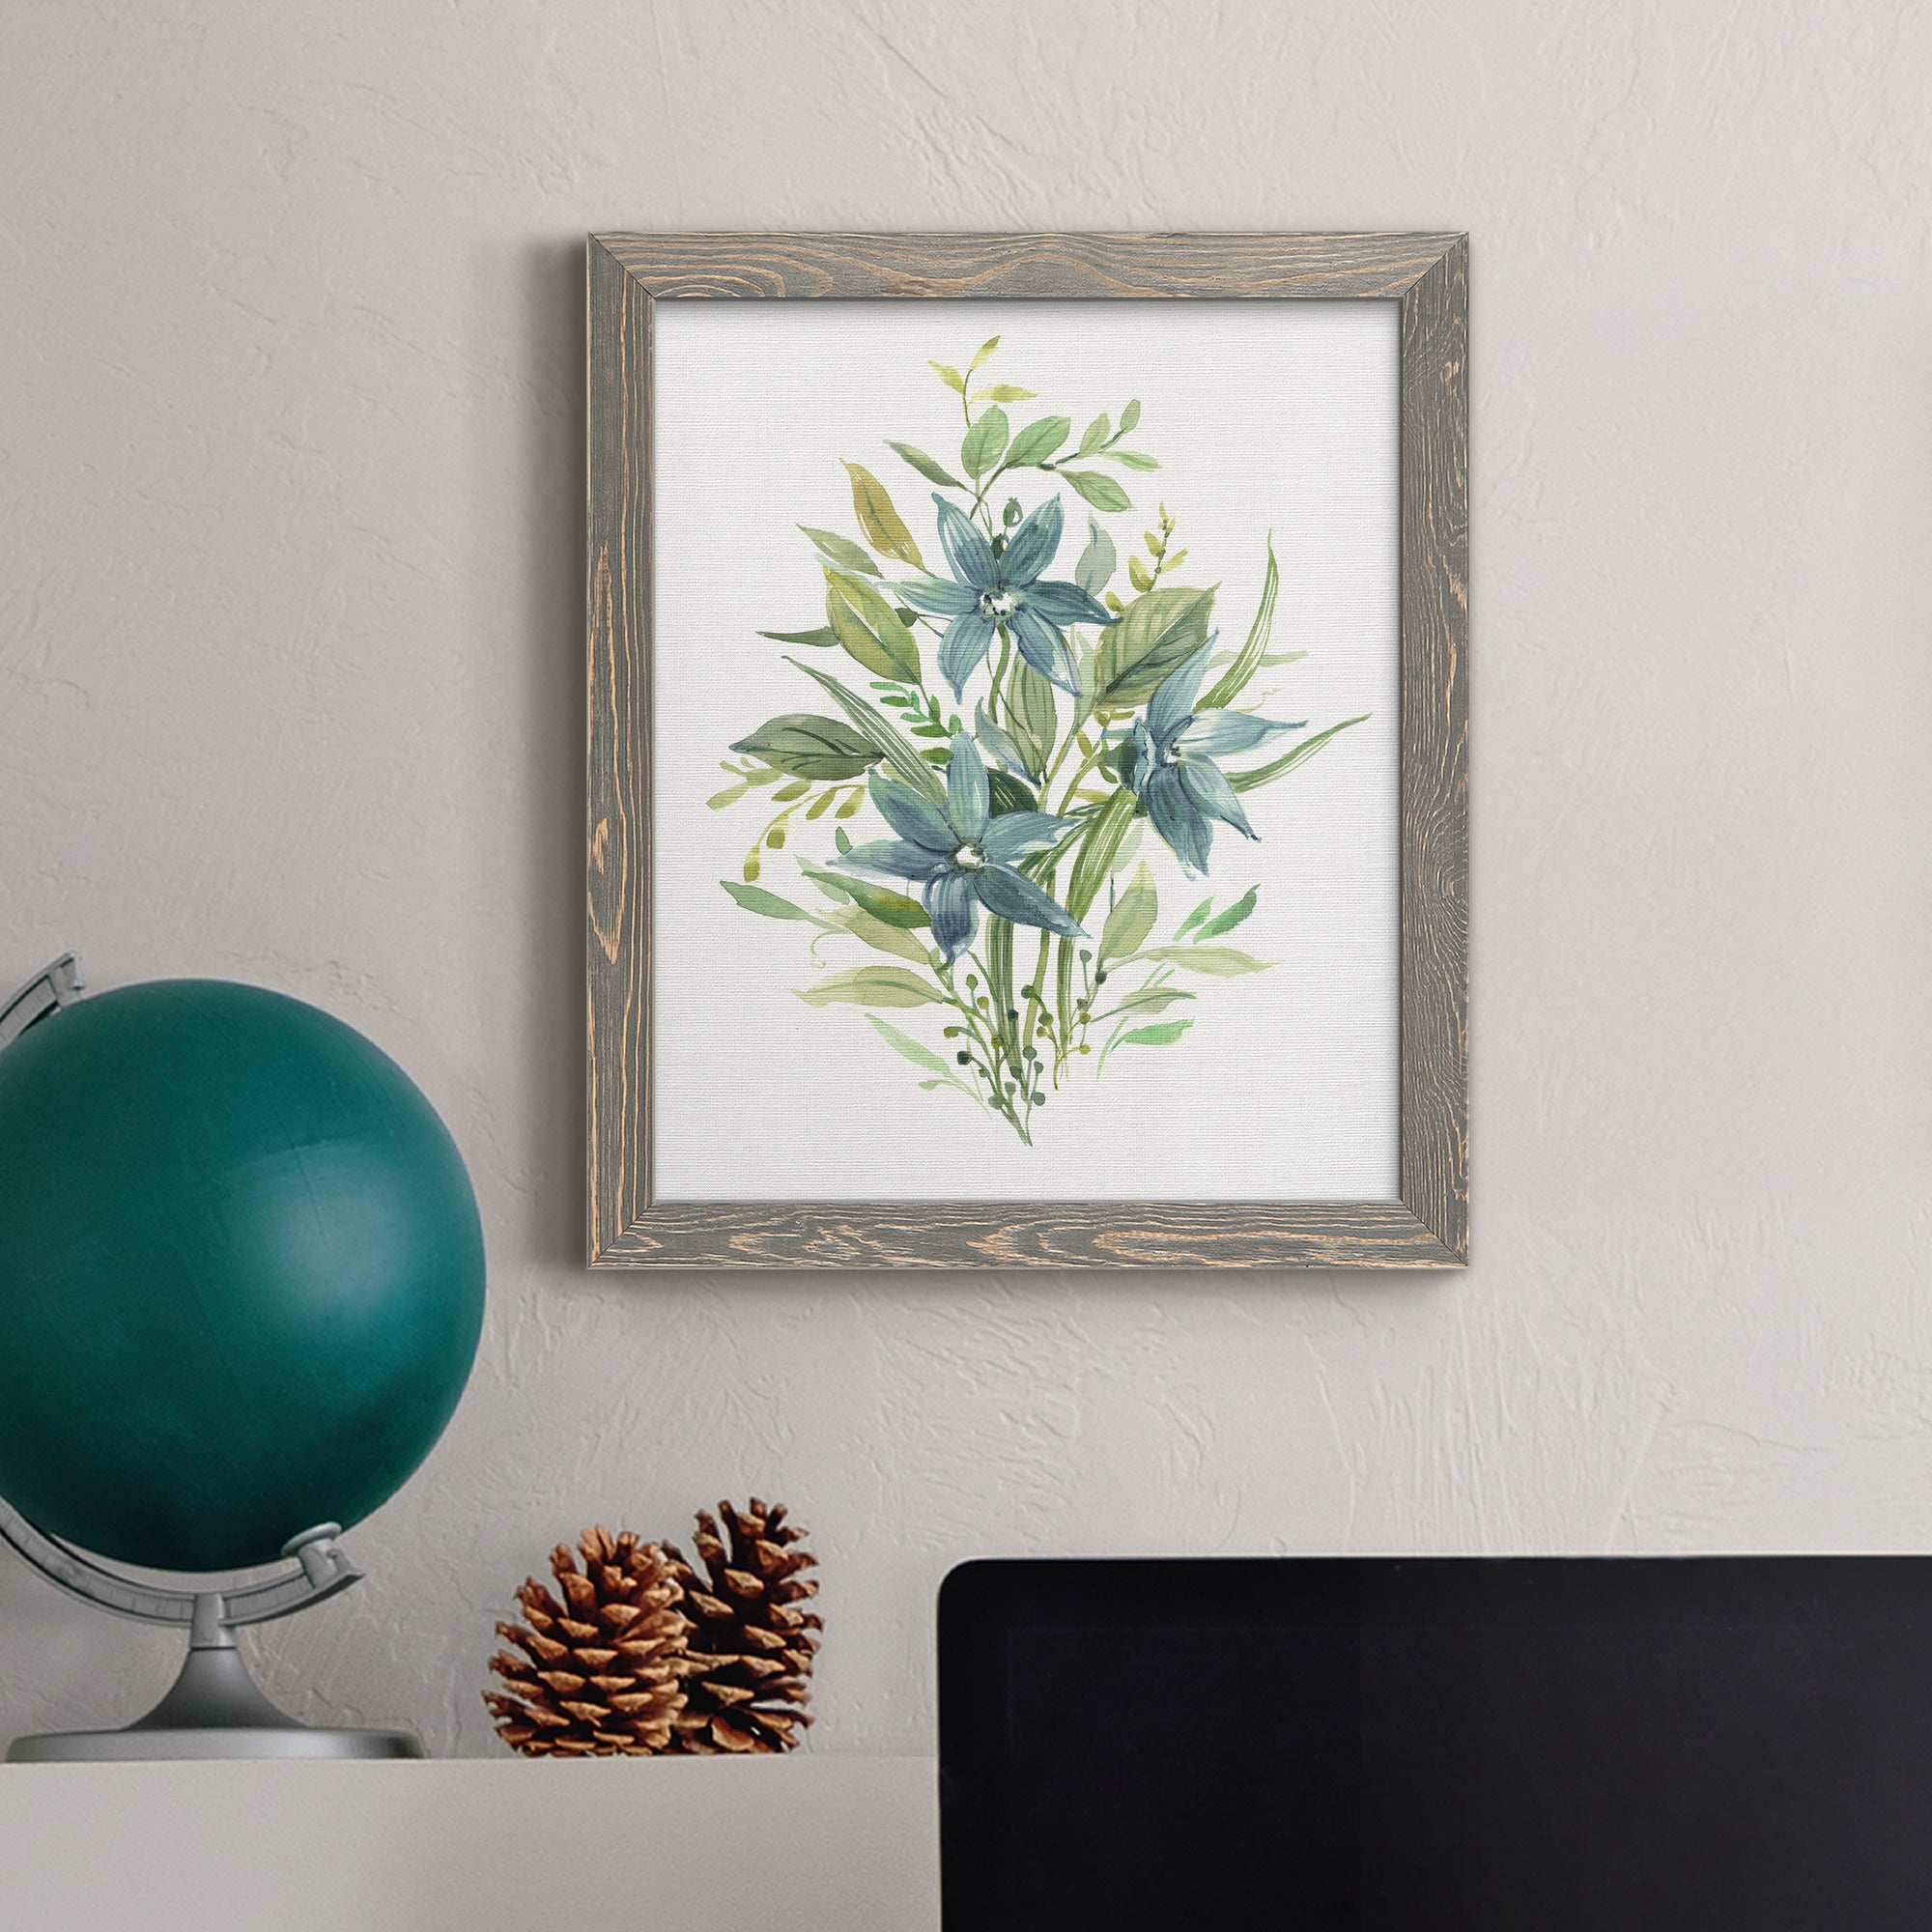 Greenery I - Premium Canvas Framed in Barnwood - Ready to Hang